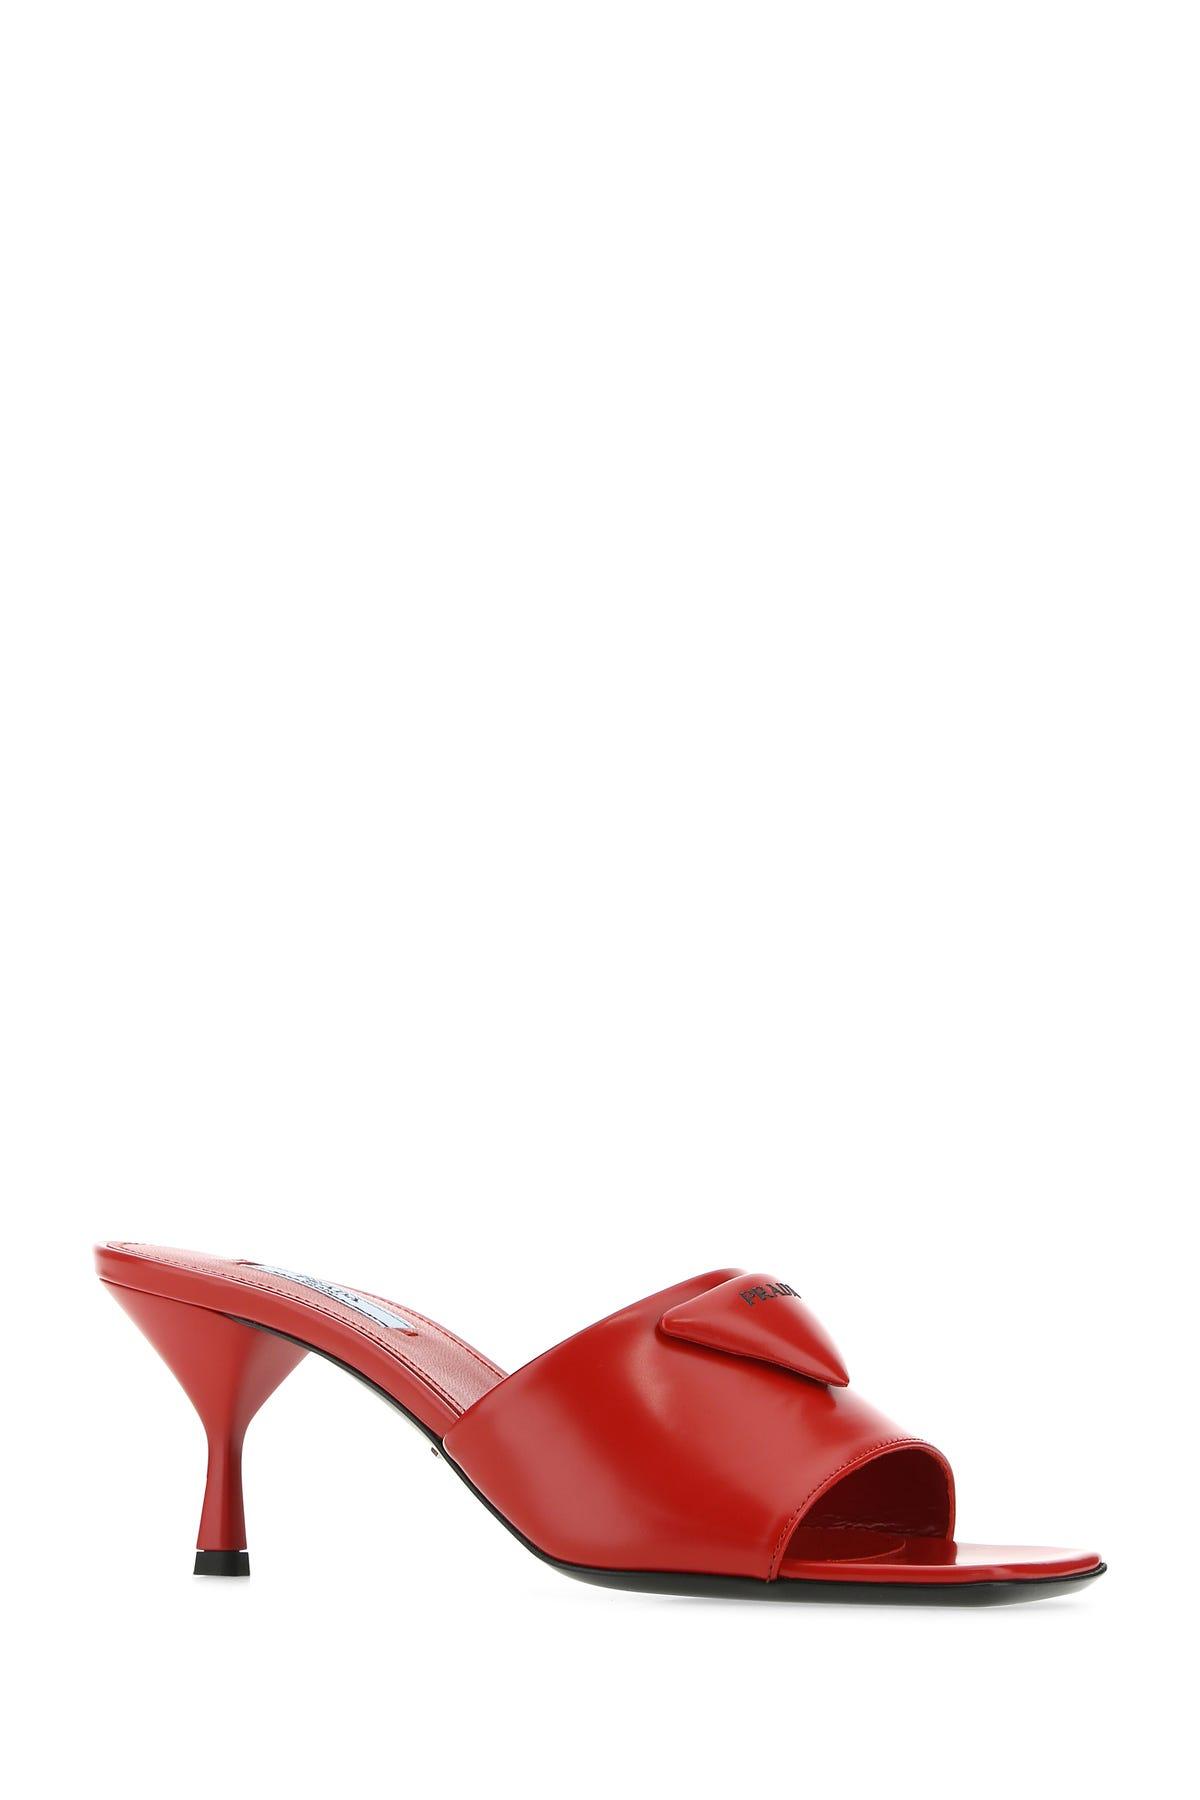 Prada Tiziano Red Leather Pumps Womens Shoes Heels Pump shoes 